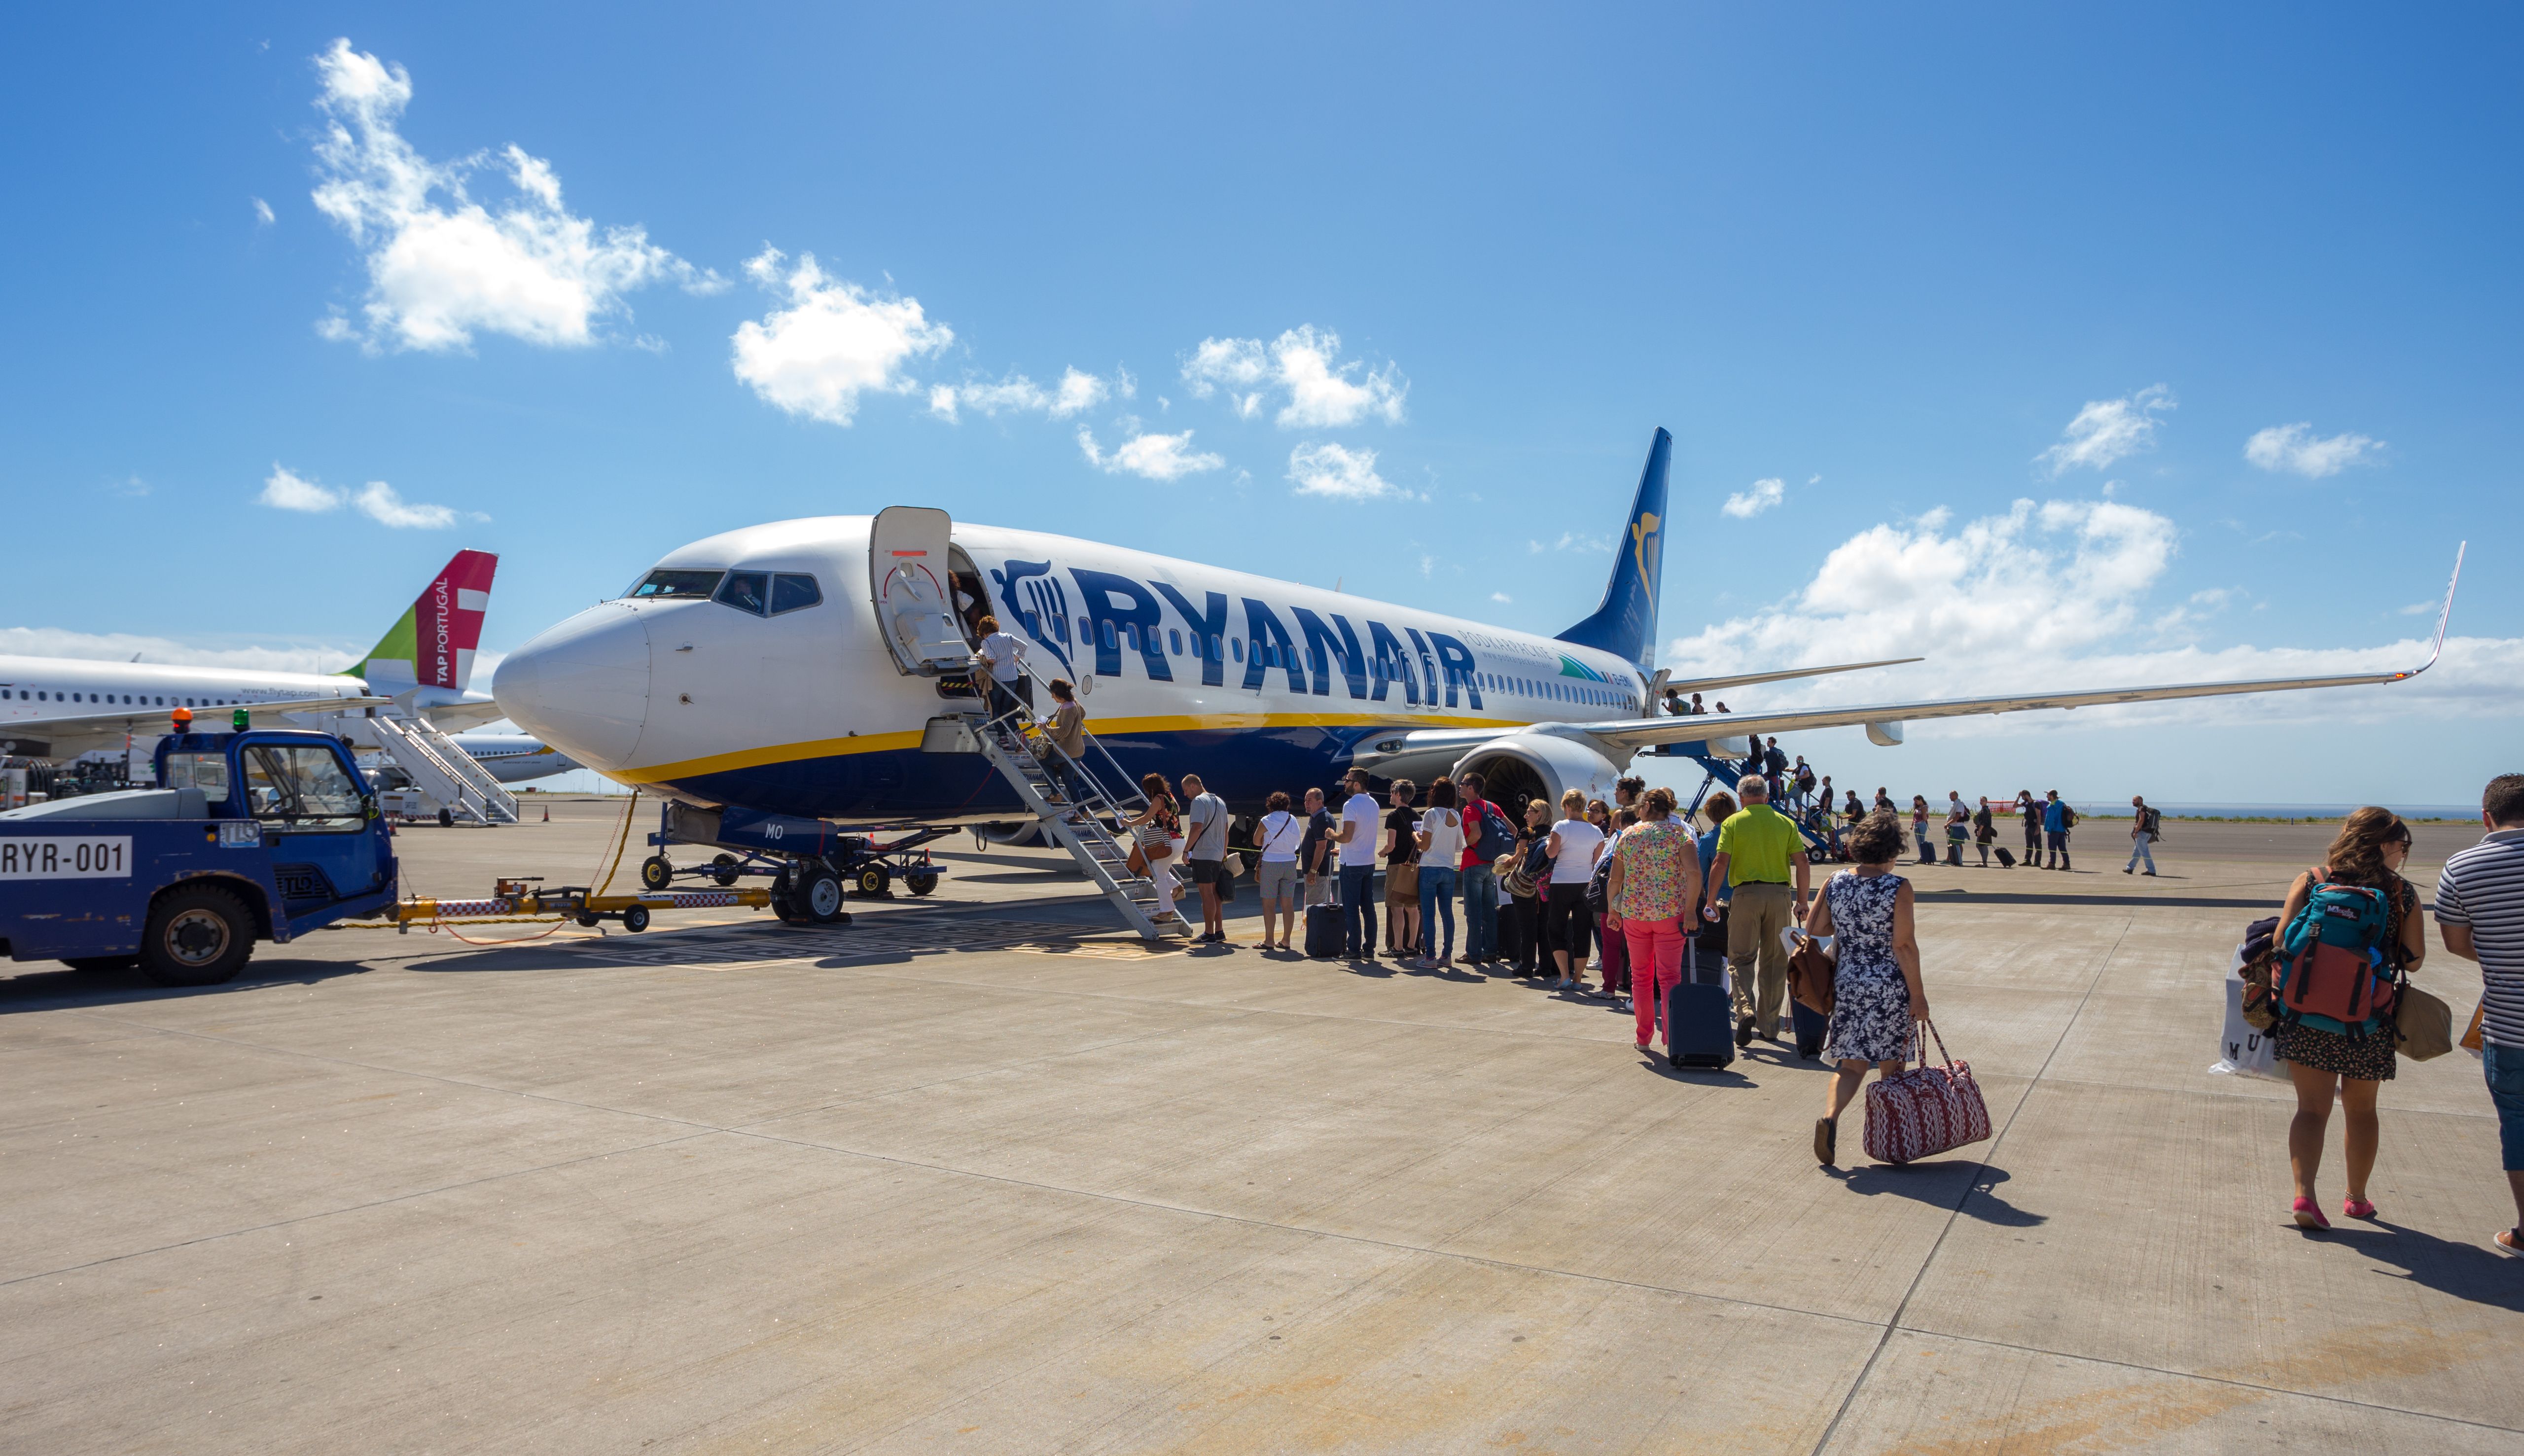 Azores, Portugal - September 20, 2016: Passengers boarding on the aircraft of low cost airline company Ryanair.